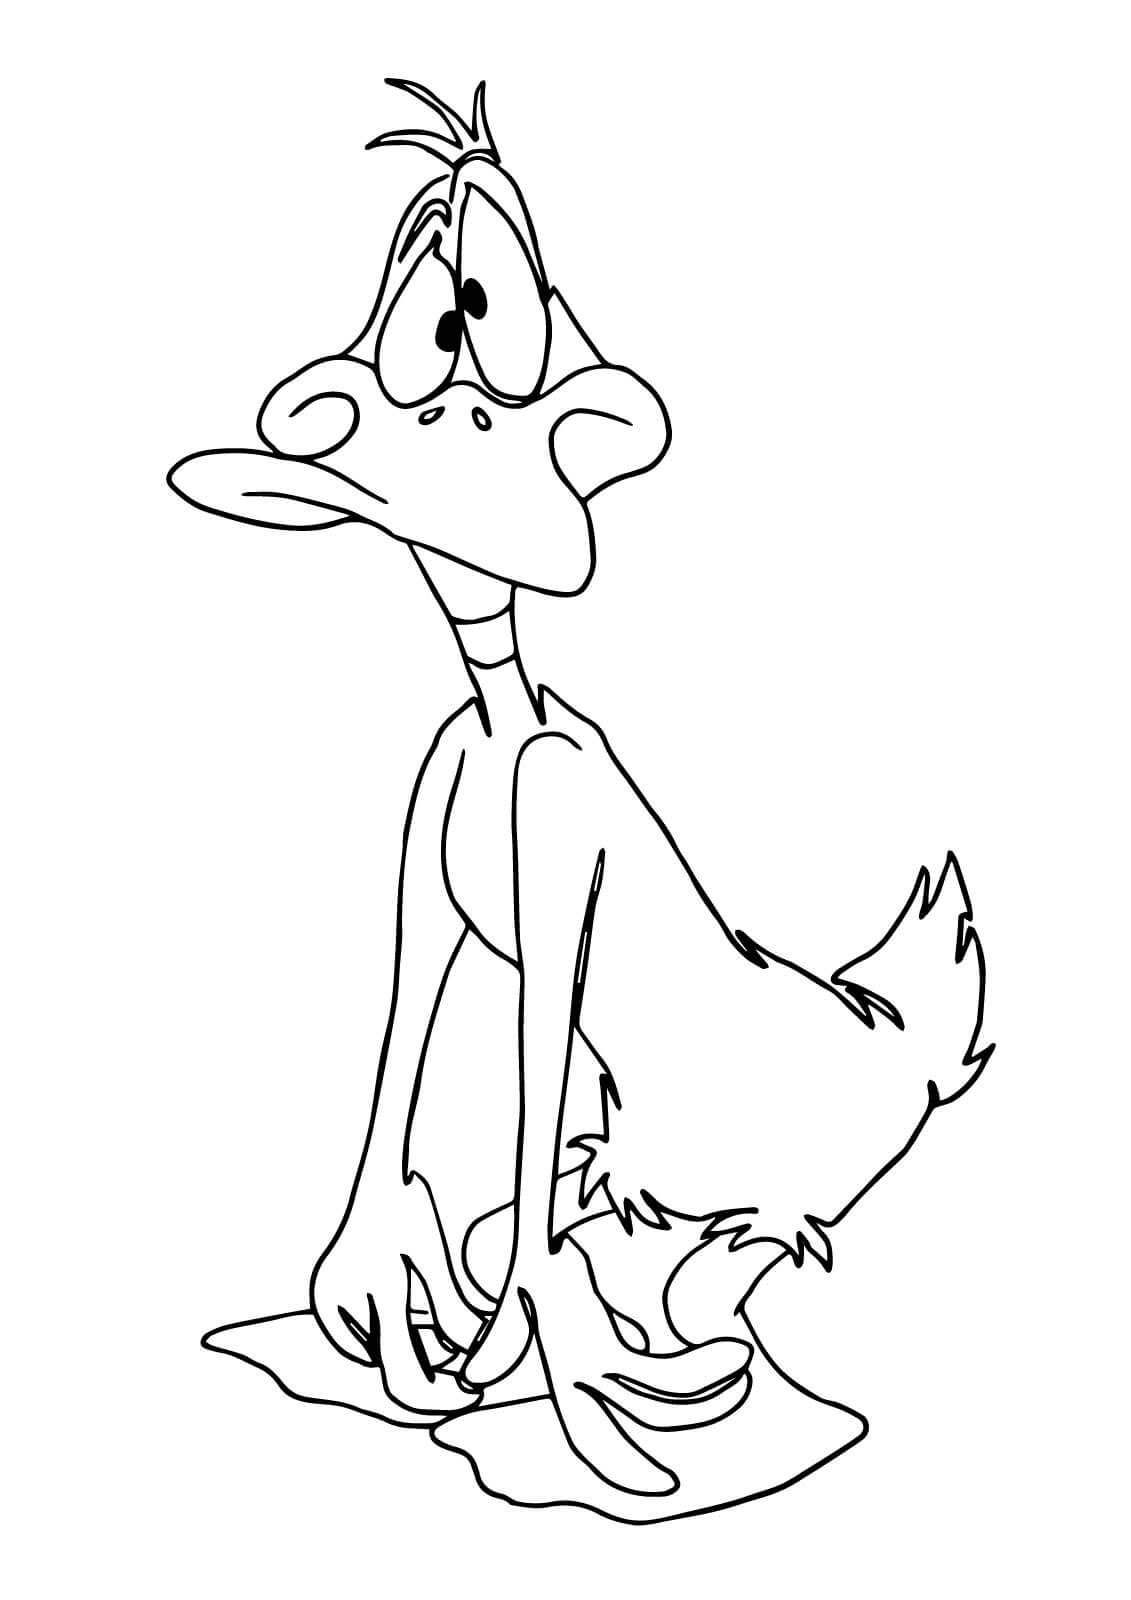 Confused Daffy Duck Coloring Page